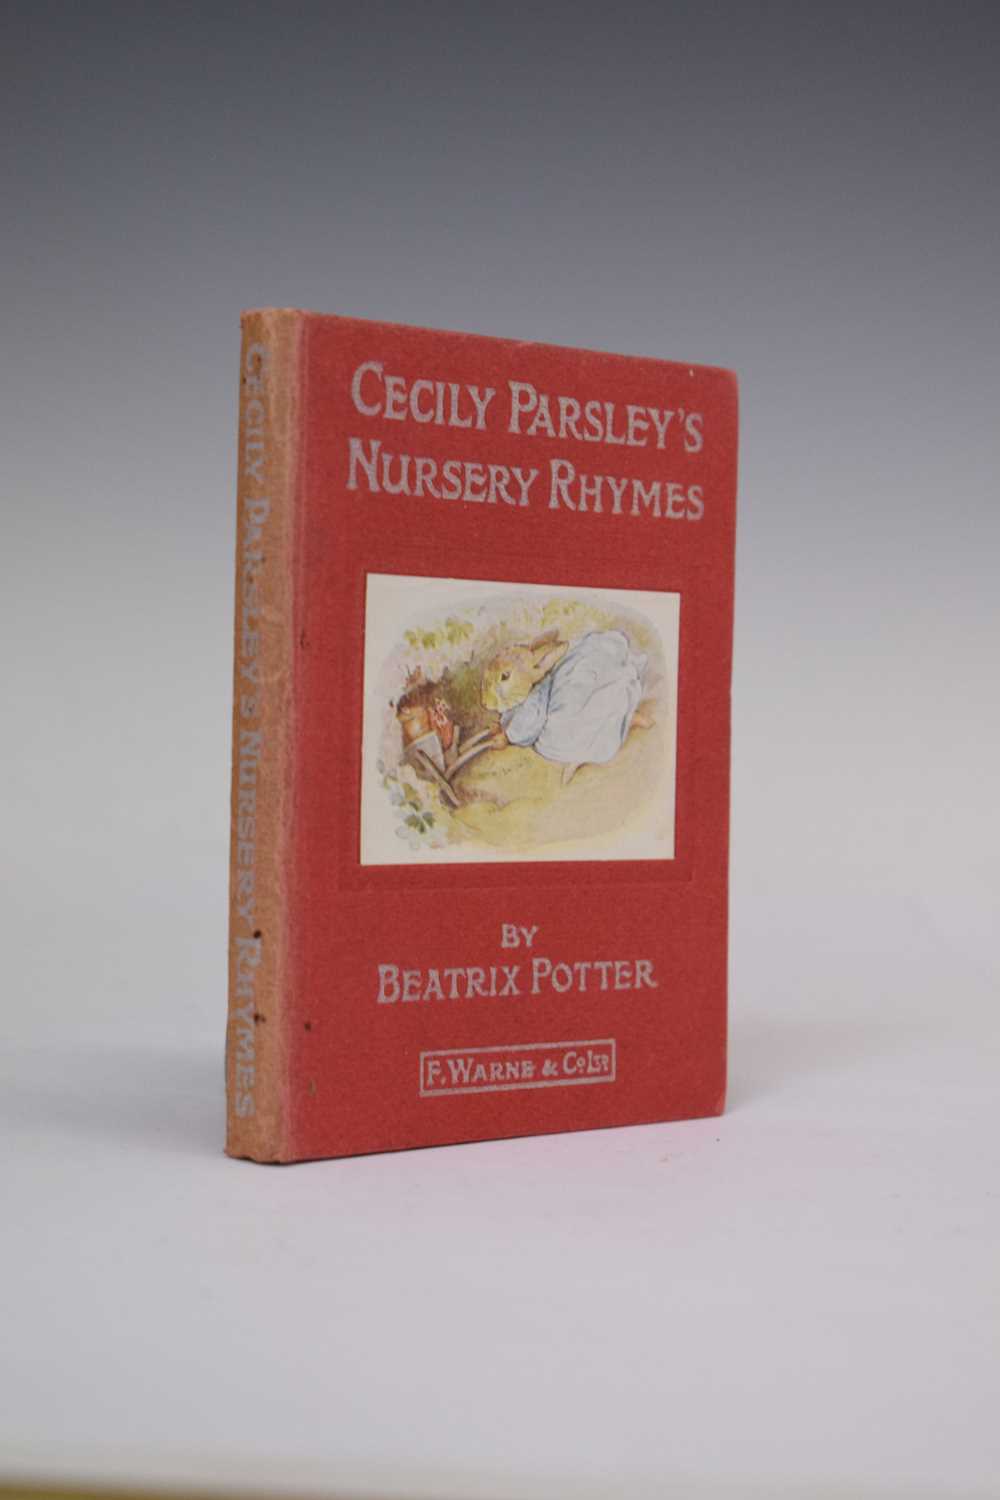 Potter, Beatrix - 'Cecily Parsley's Nursery Rhymes' - First edition - Image 20 of 37